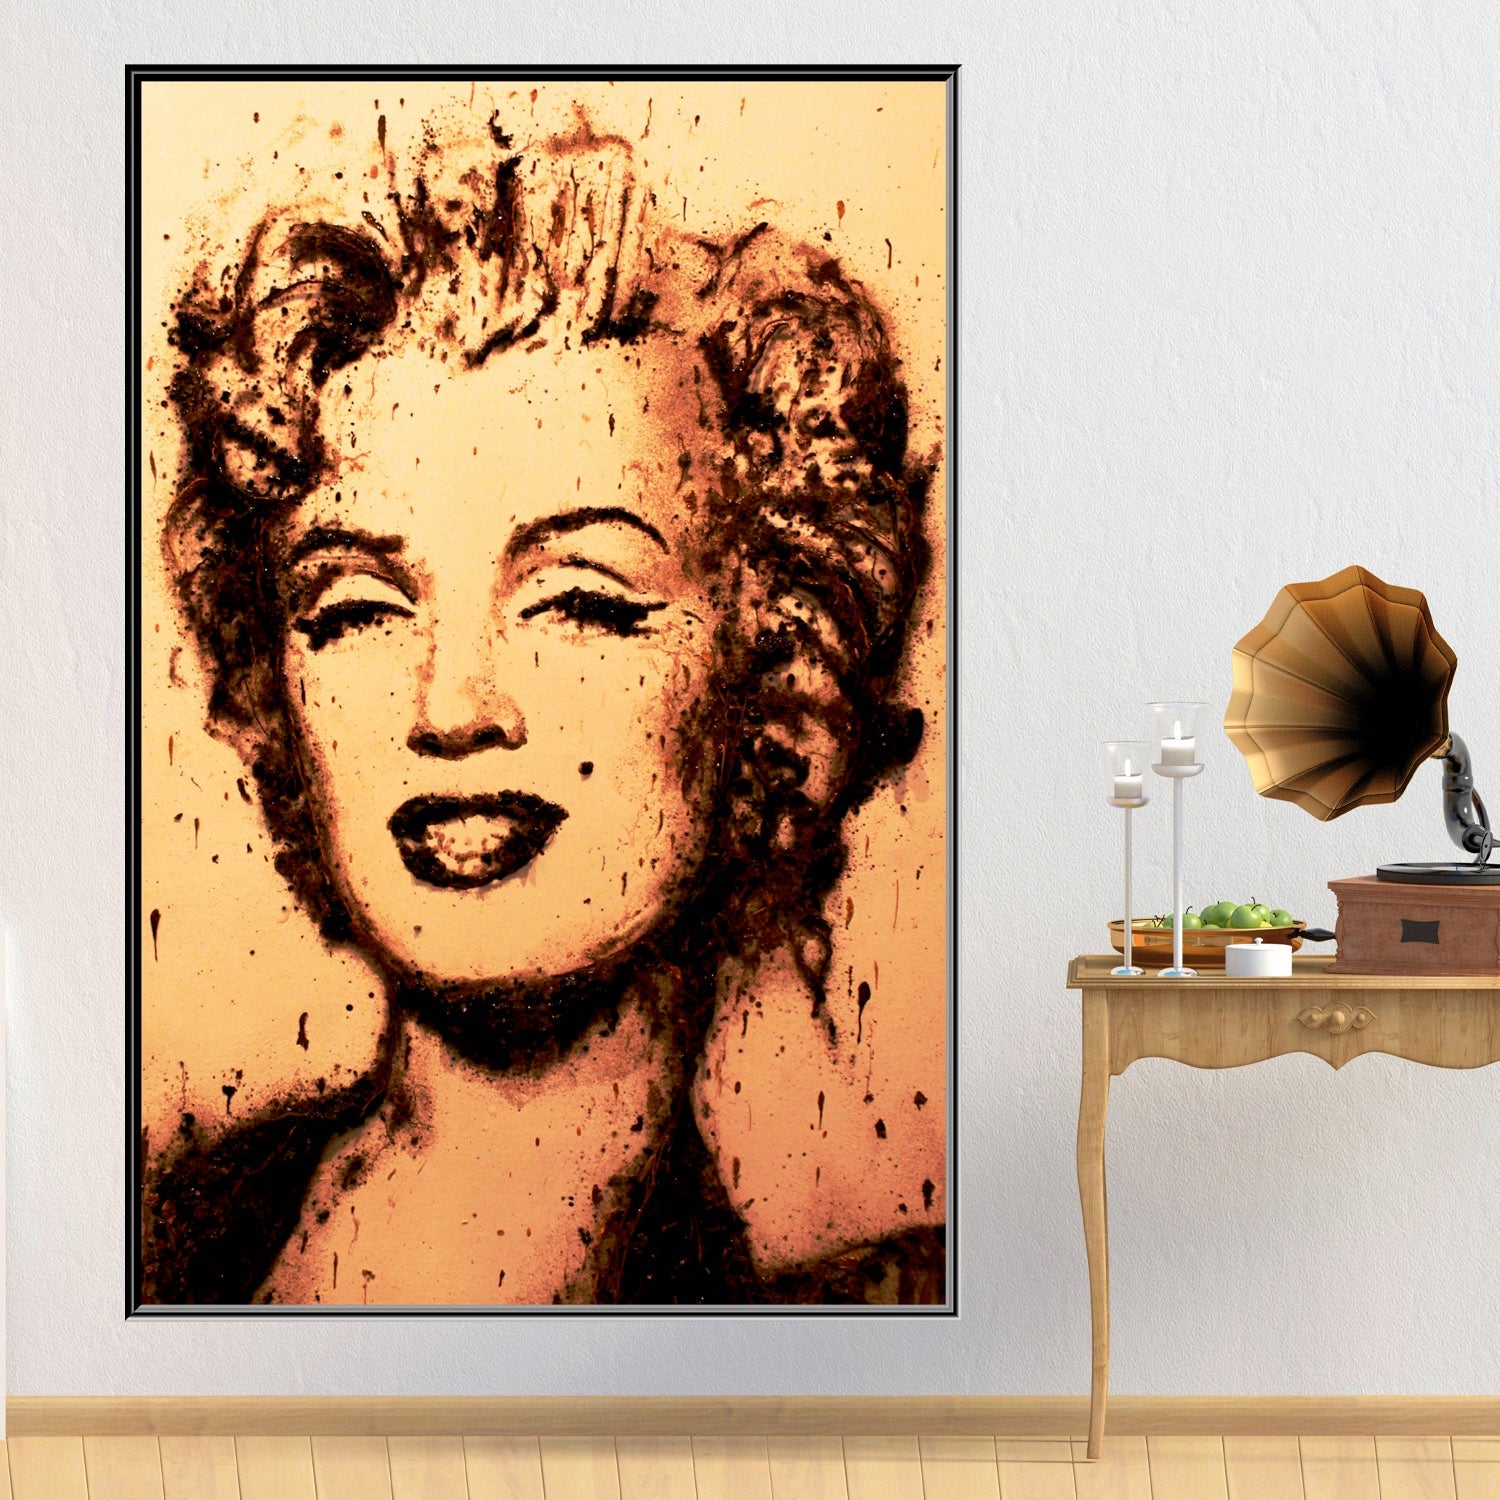 https://cdn.shopify.com/s/files/1/0387/9986/8044/products/MarilynMonroeSketchCanvasArtprintStretched-1.jpg